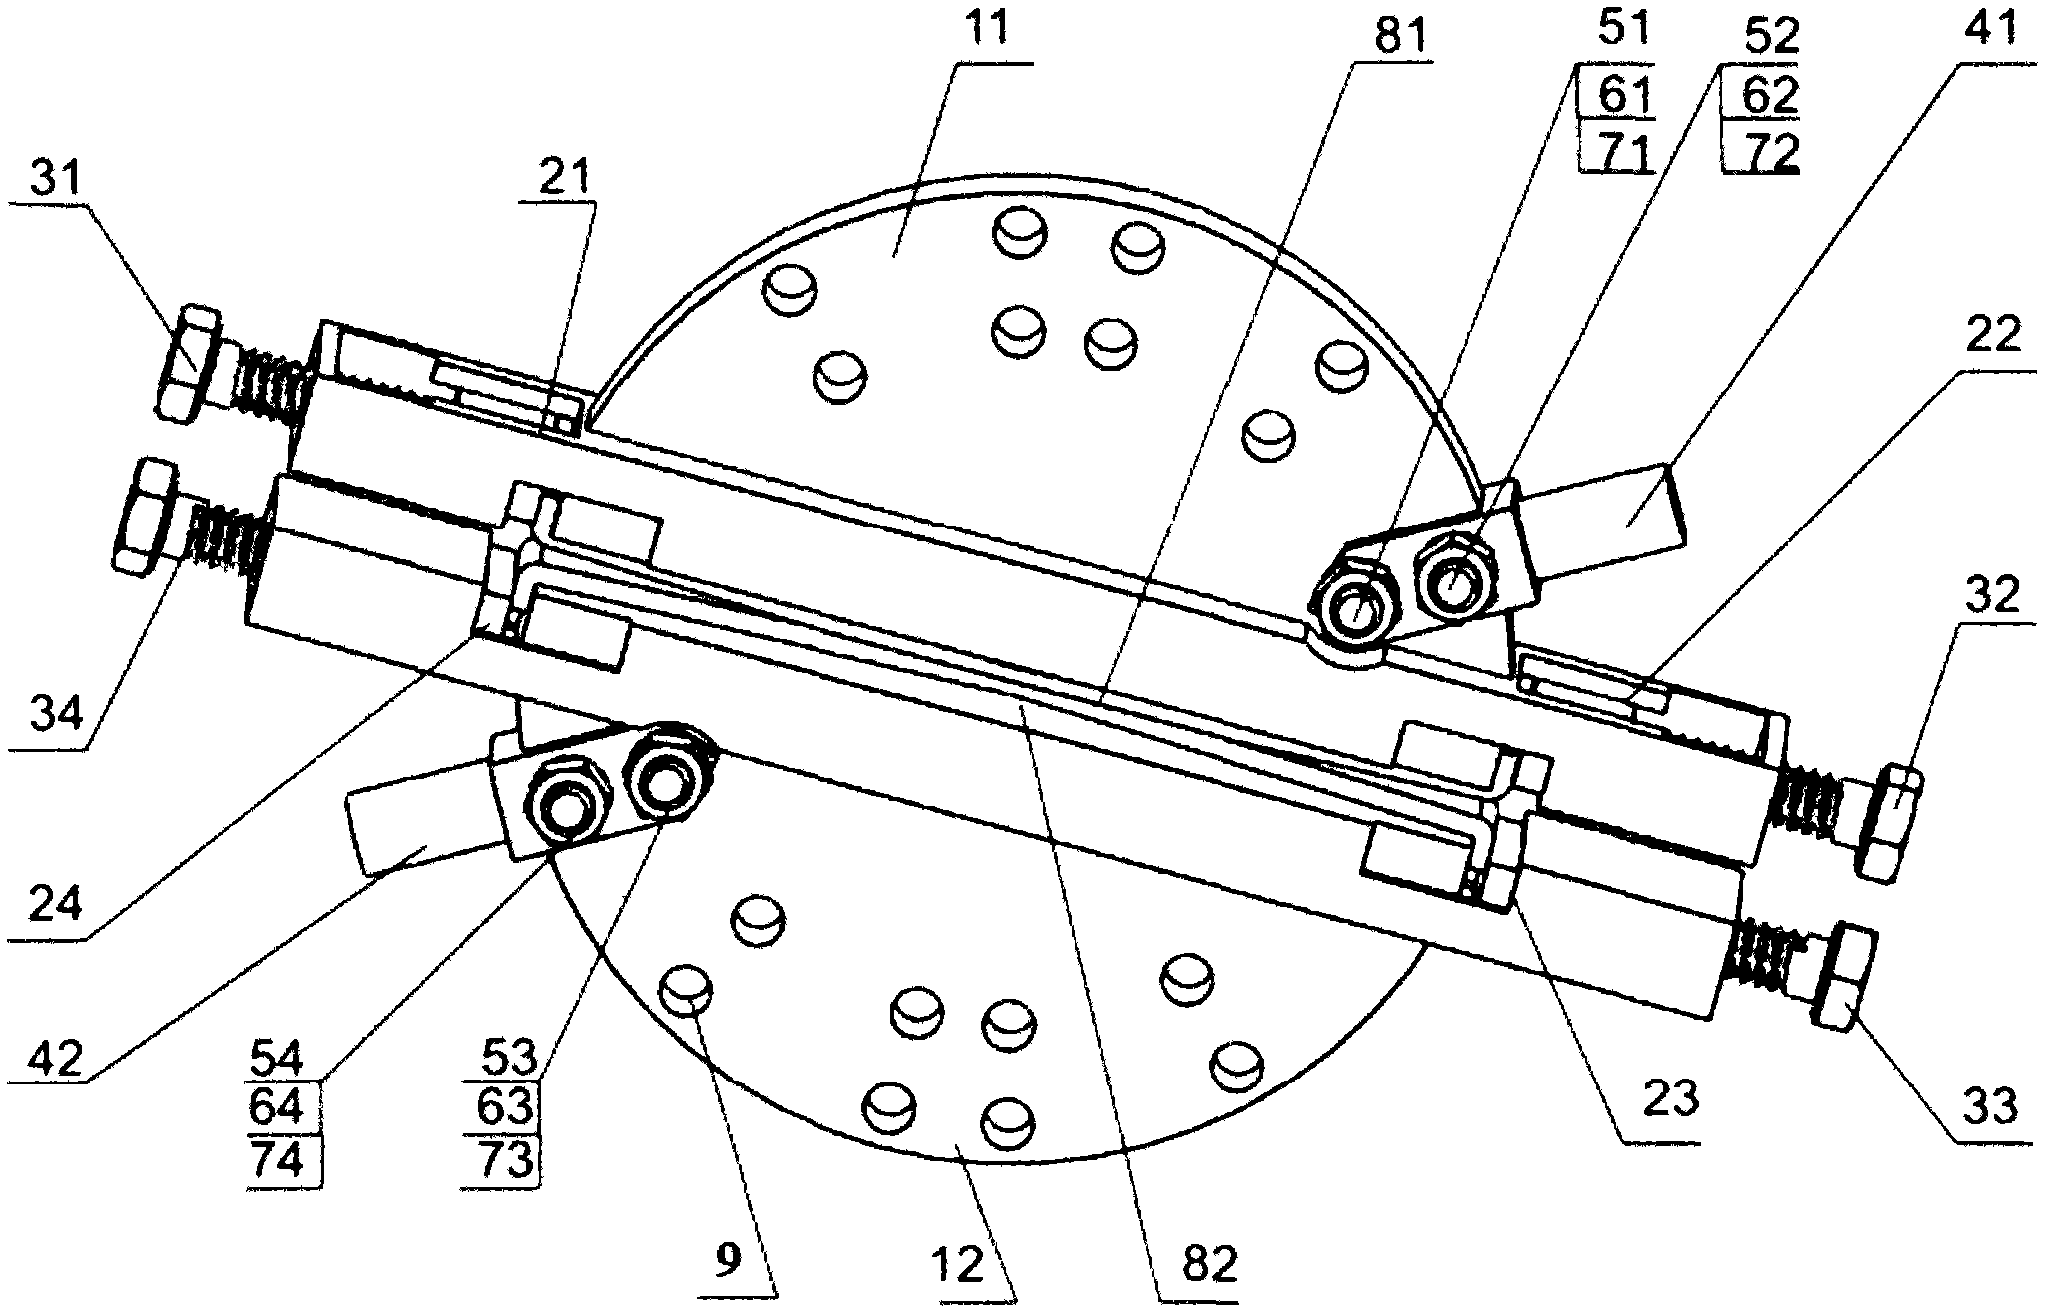 Point joint tensile-shear strength testing device capable of applying multi-directional loads